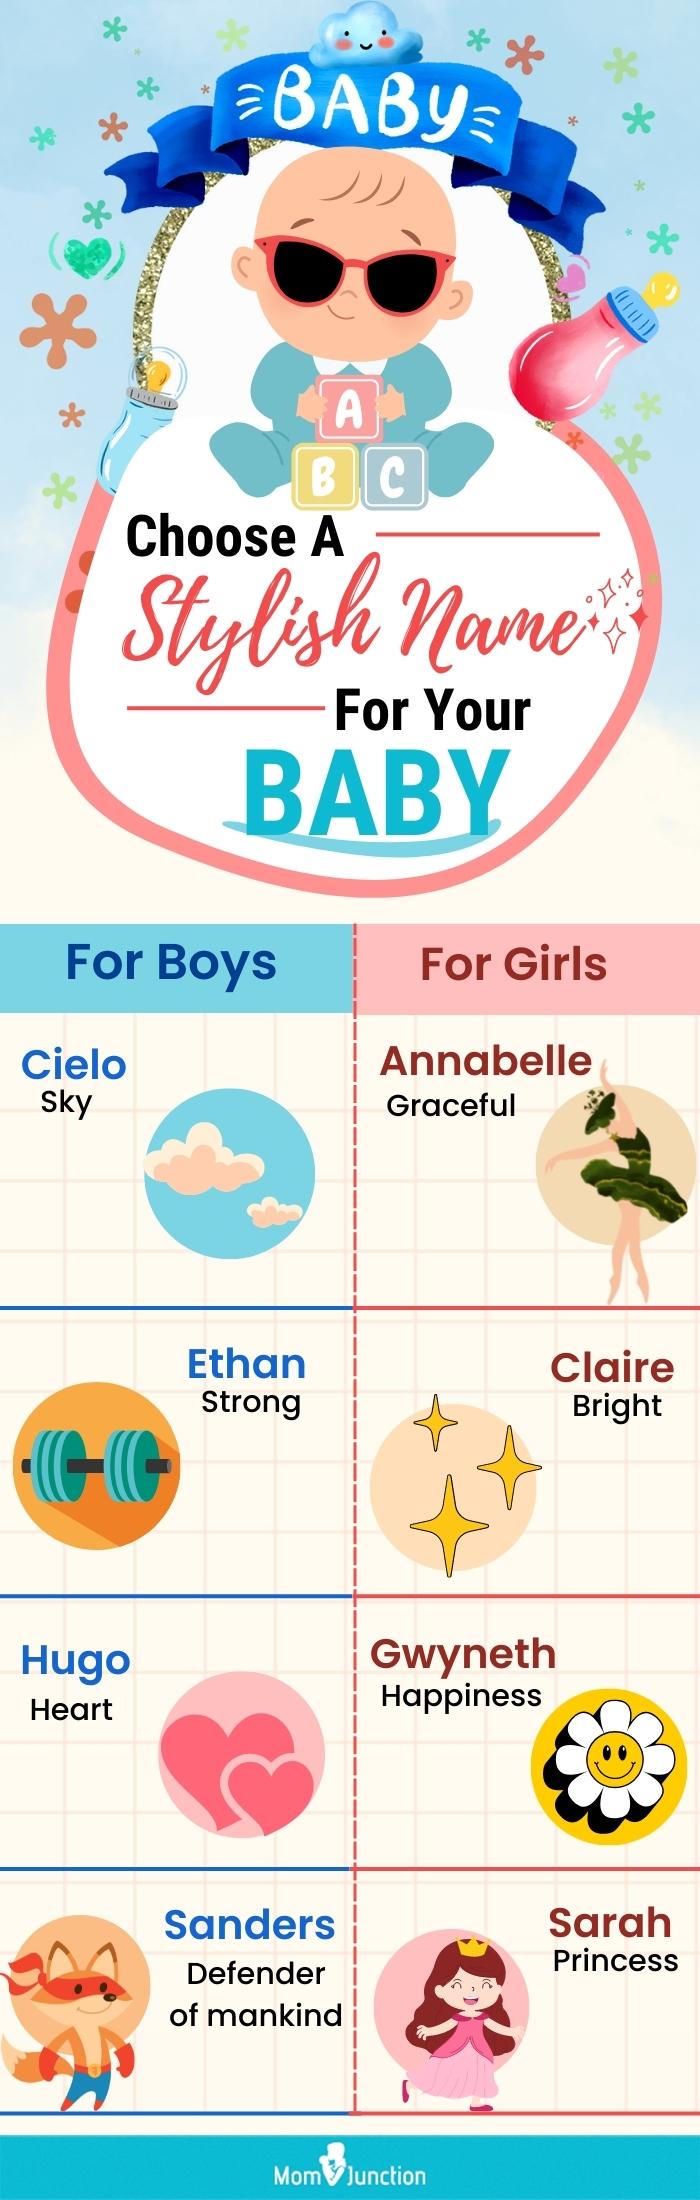 stylish name for your baby [infographic]